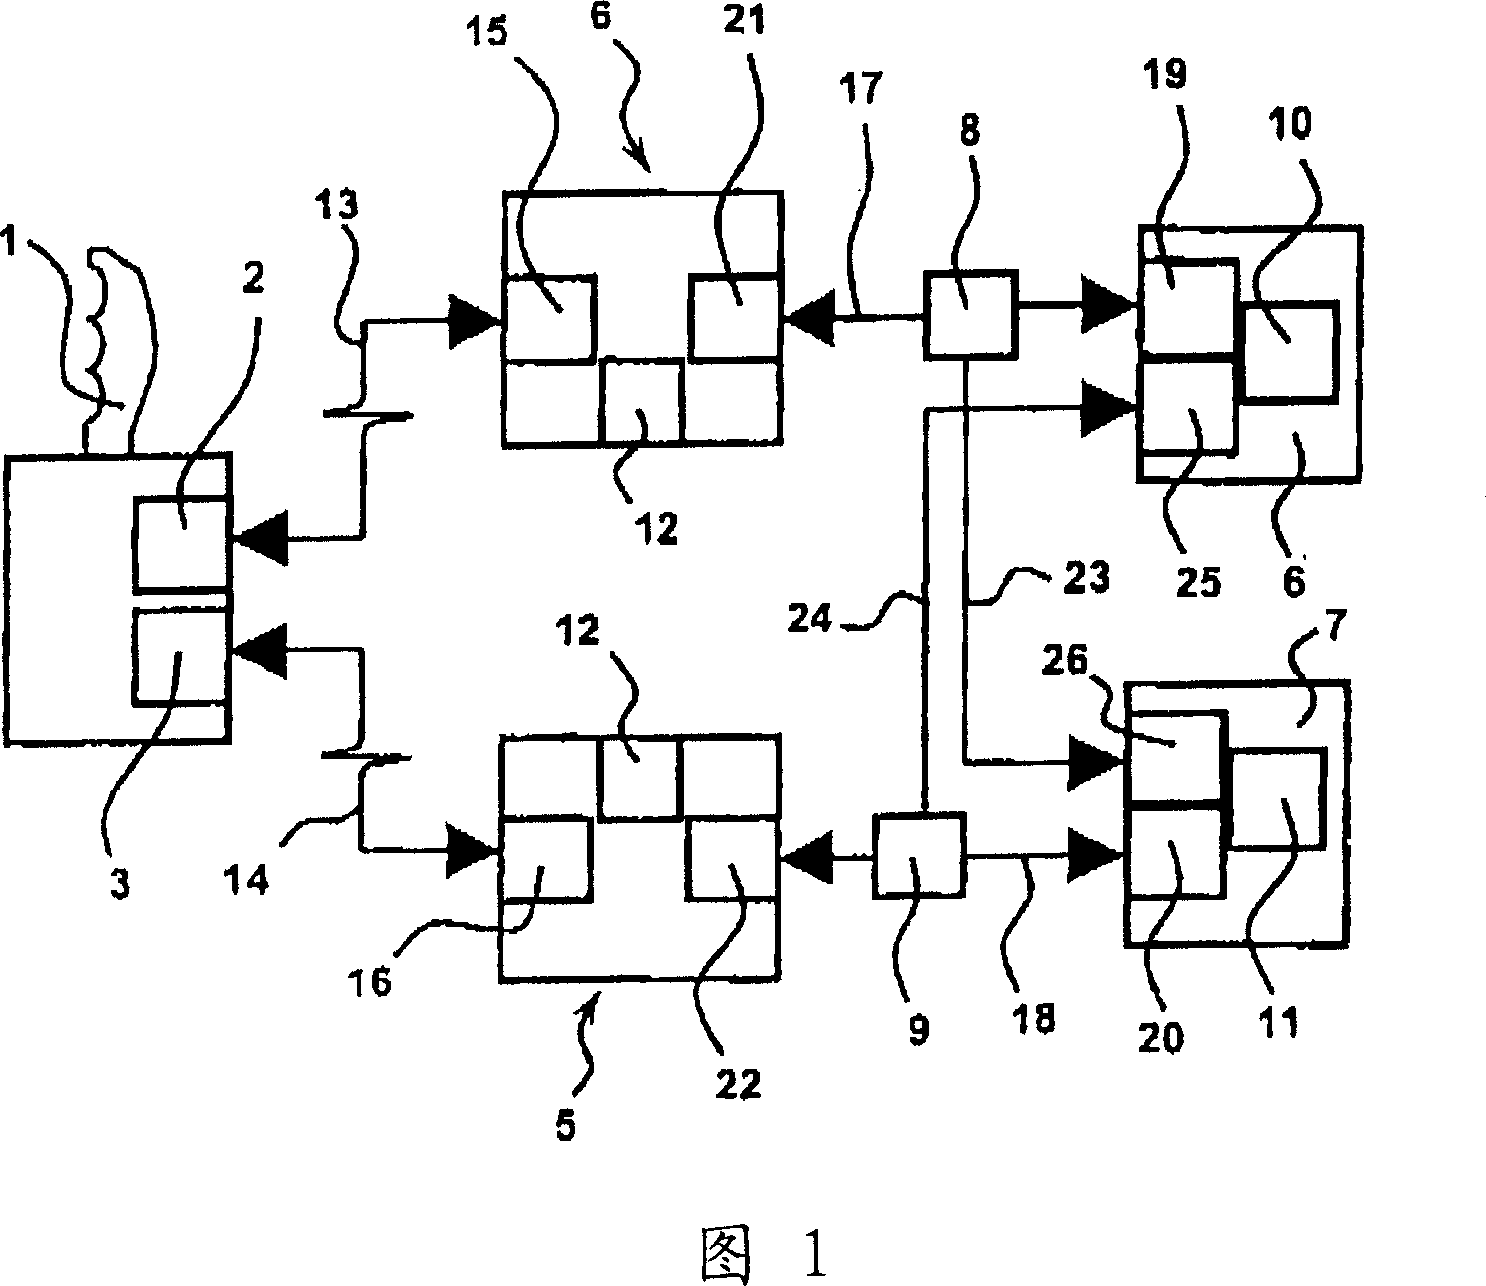 Communication network based on master/slave architecture for connecting sensors and actuators